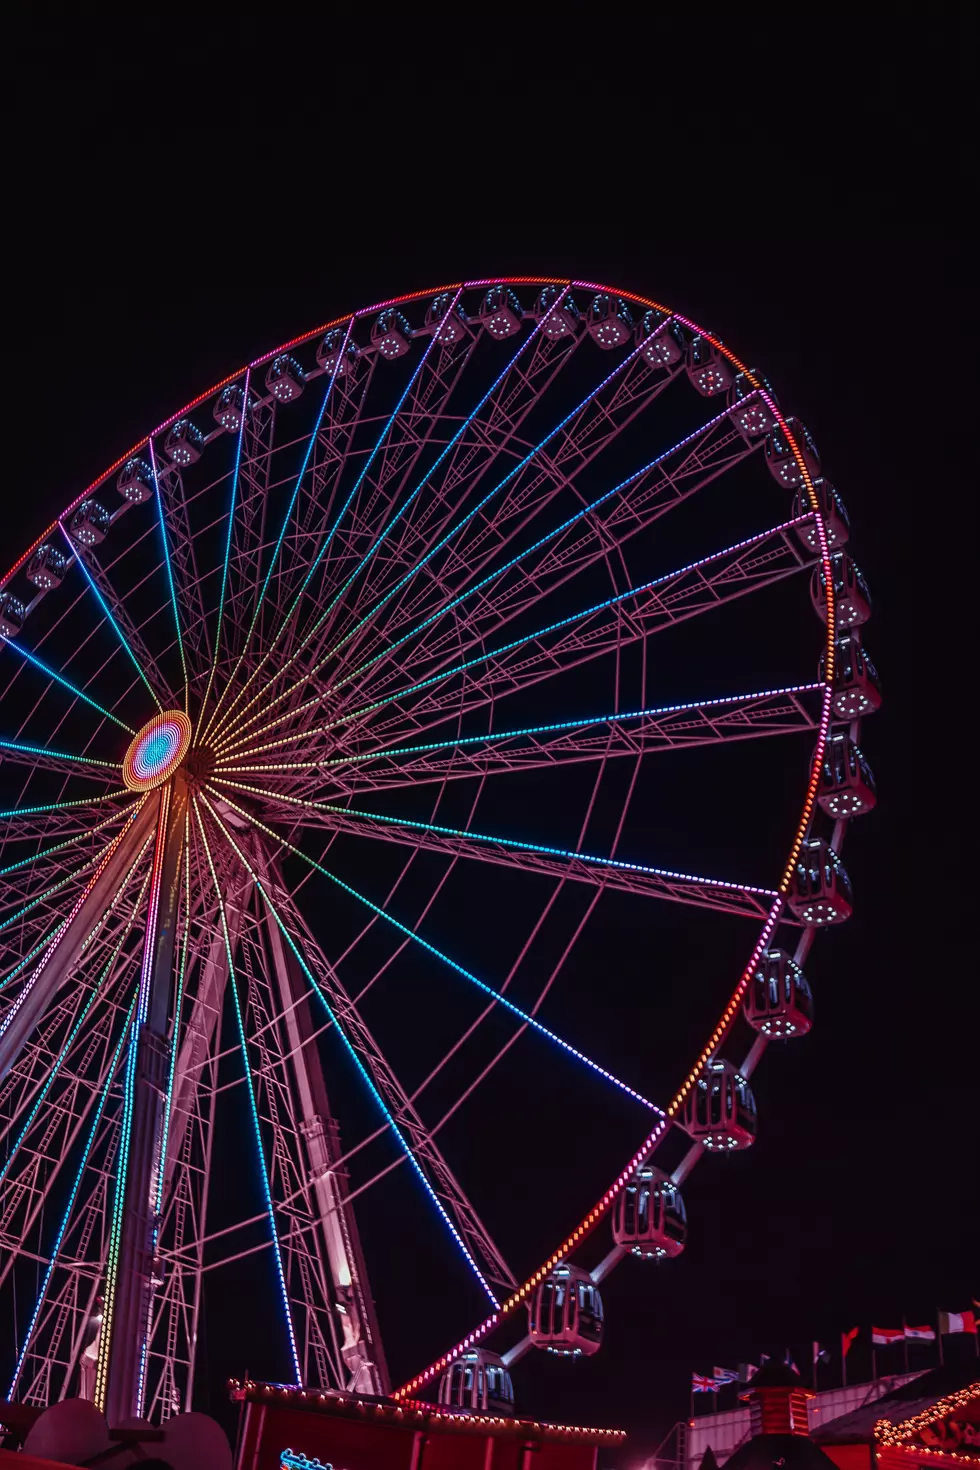 Couple Arrested for Having Sex on Cedar Point’s Giant Wheel Ride